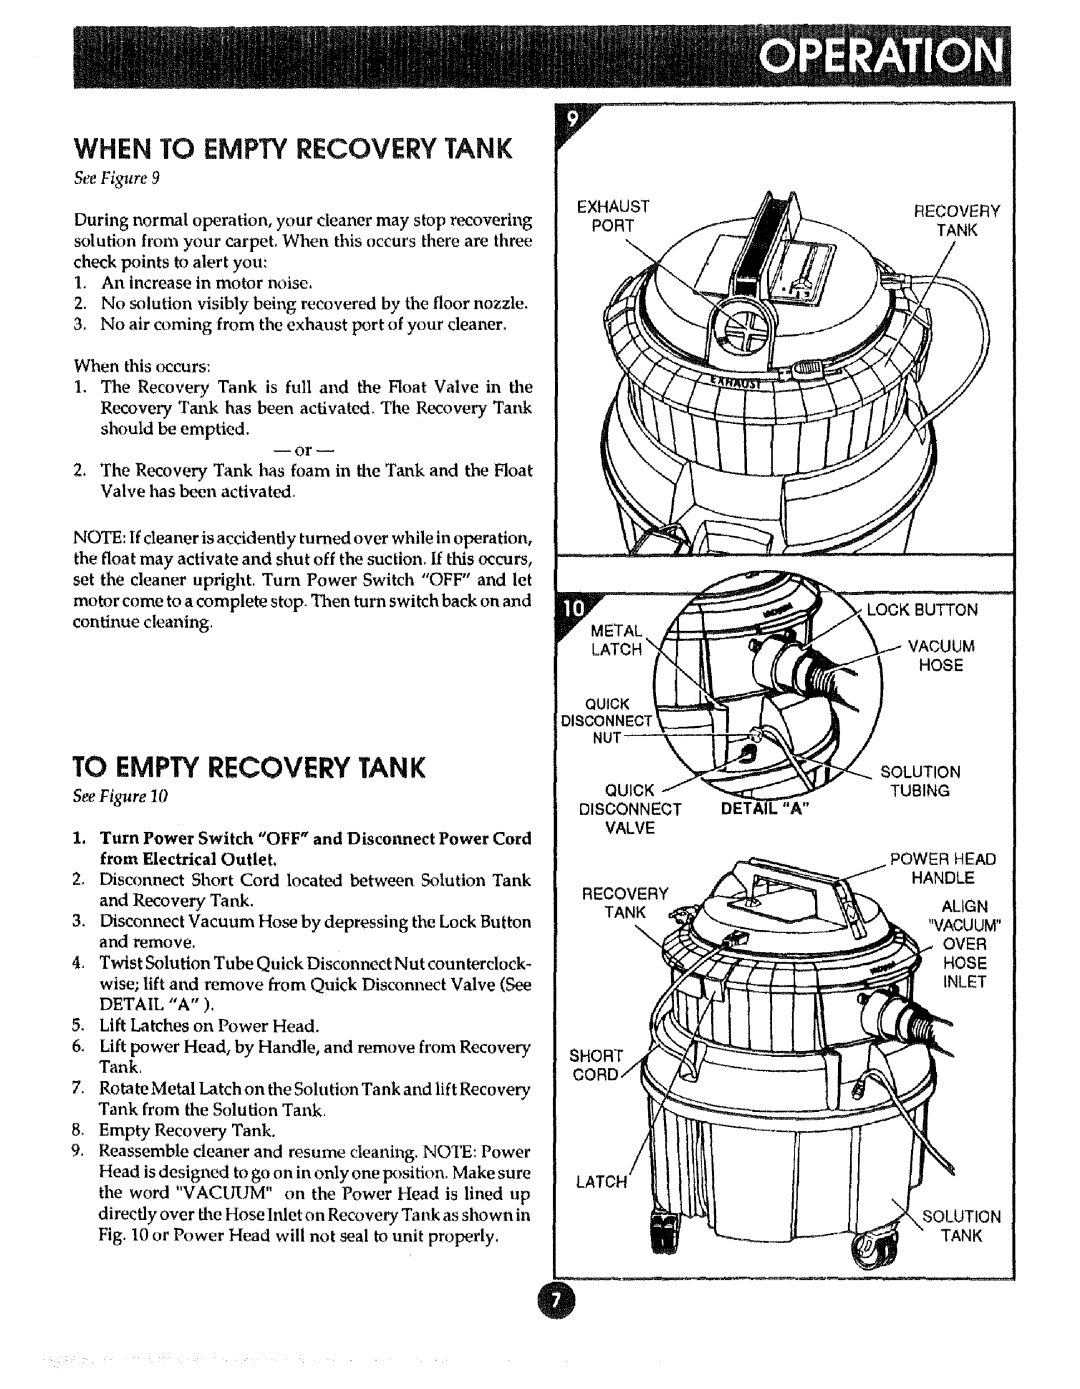 Sears 8690290, 175 manual When To Empty Recovery Tank, Quick, Disconnect, See Figure 